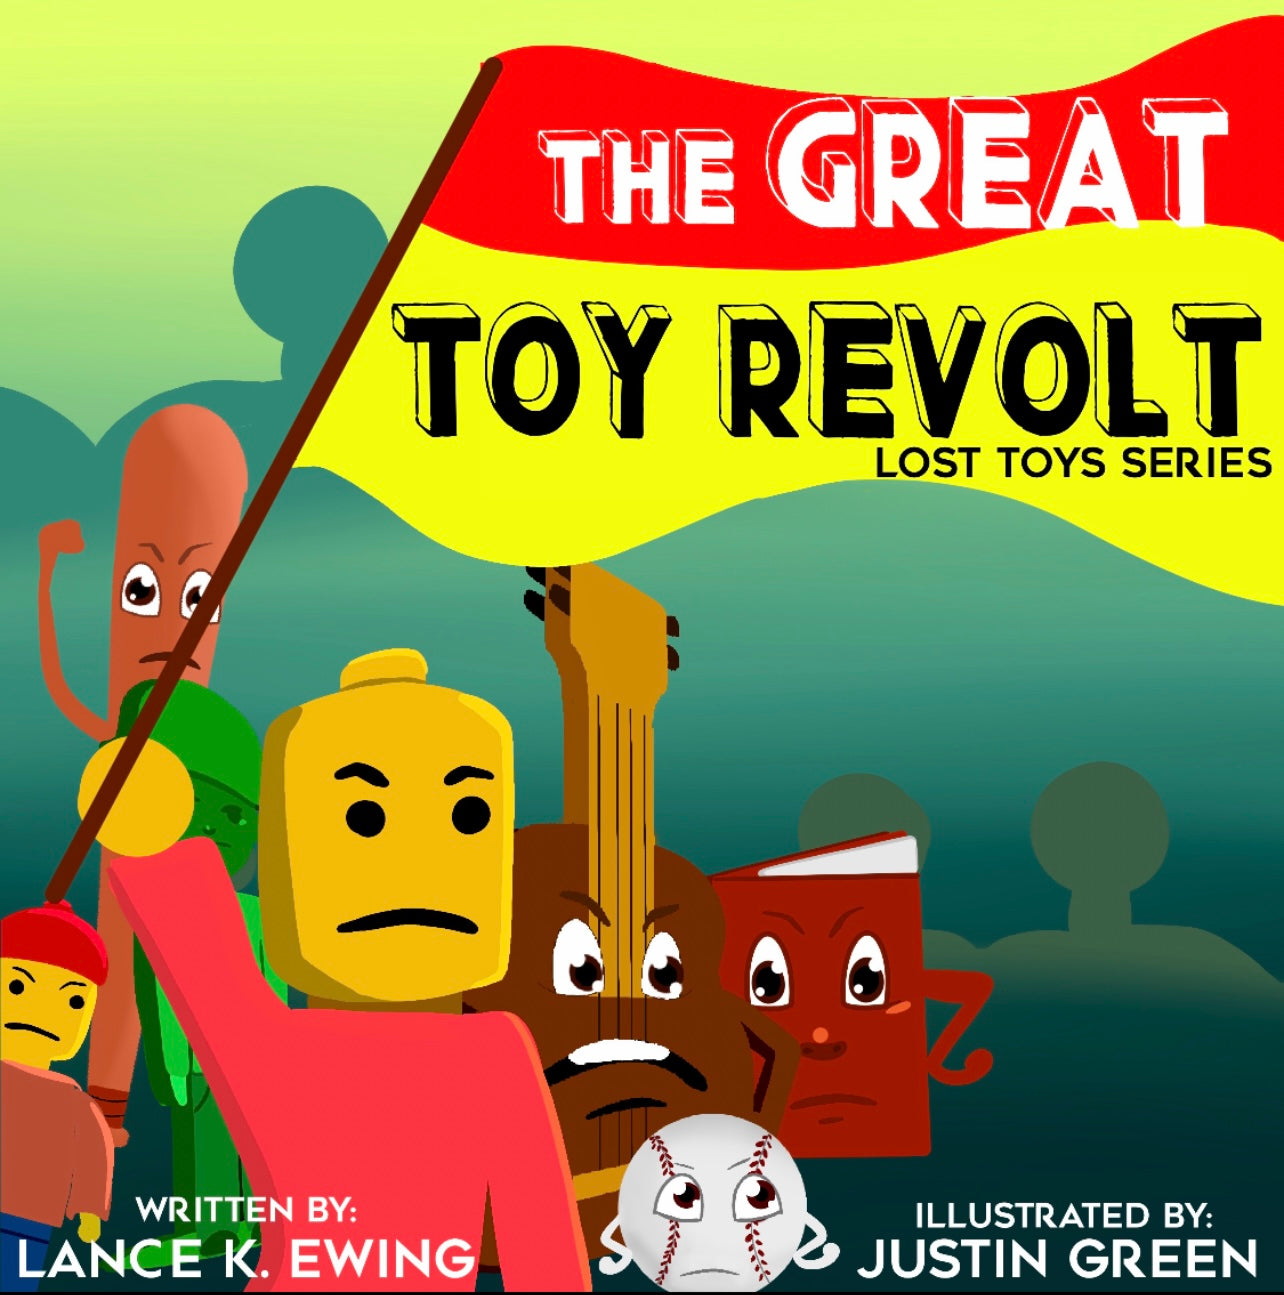 The Great Toy Revolt: Book 1 - The Lost Toy Series - Signed Edition